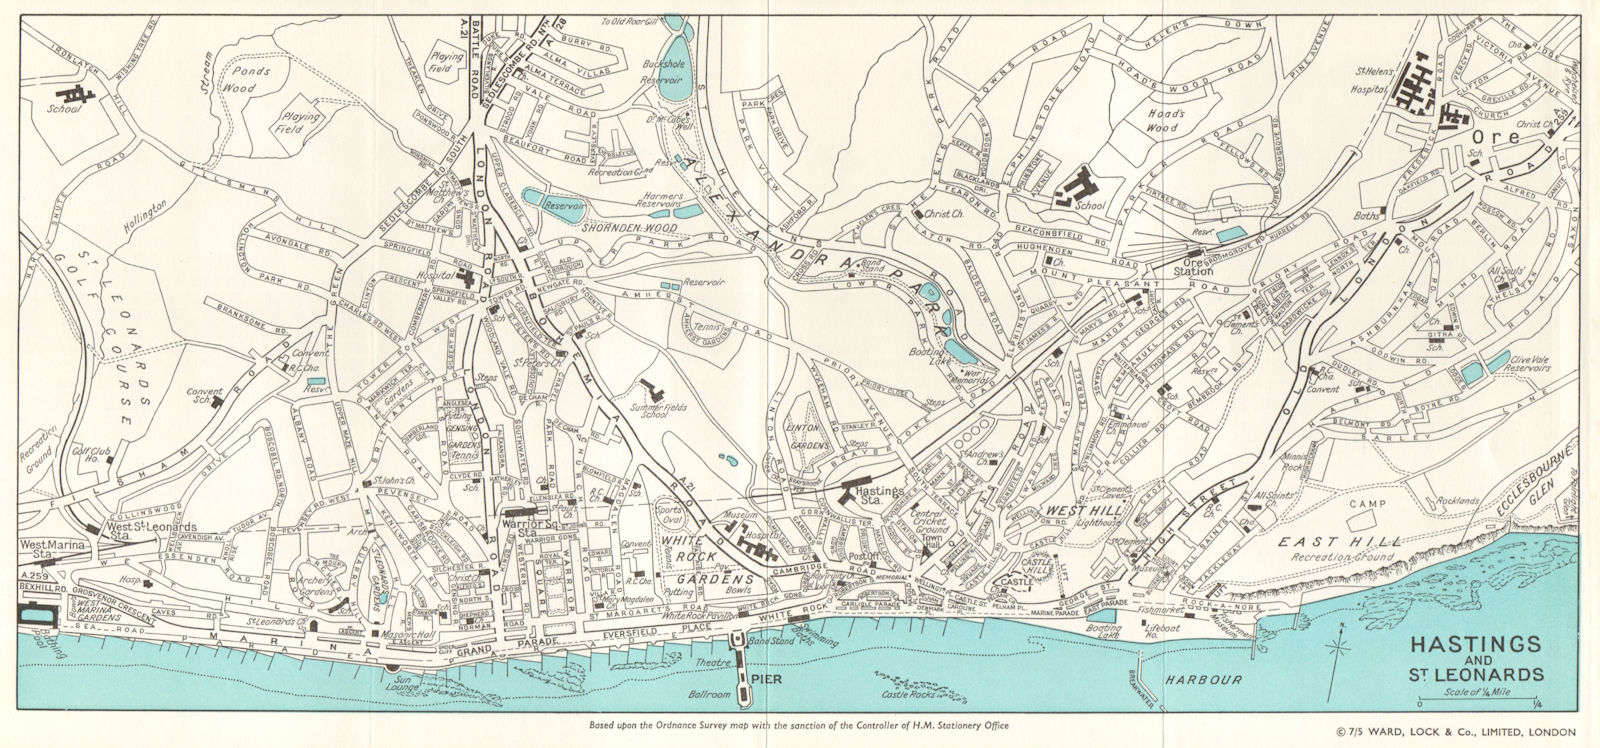 HASTINGS AND ST. LEONARDS vintage town/city plan. Sussex. WARD LOCK 1961 map